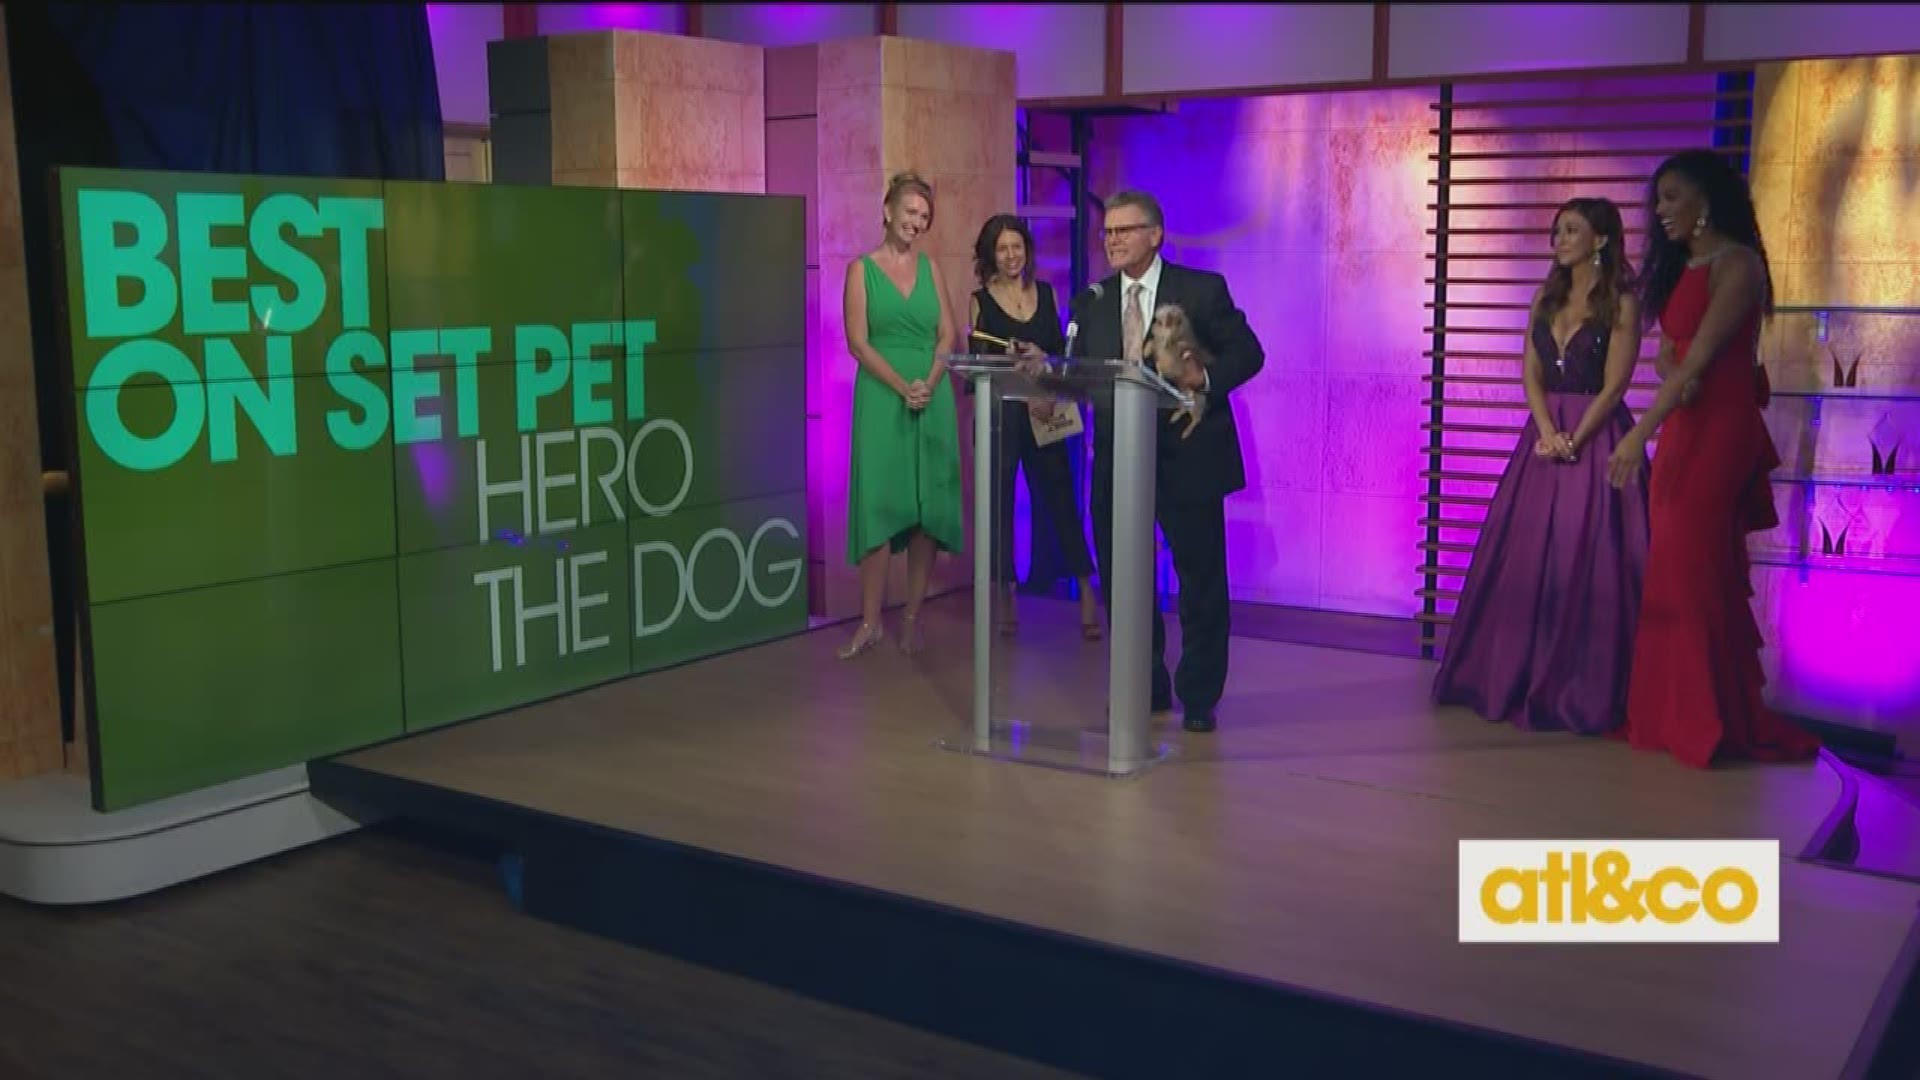 Congratulations to Hero the Dog on his A-Scene Award!